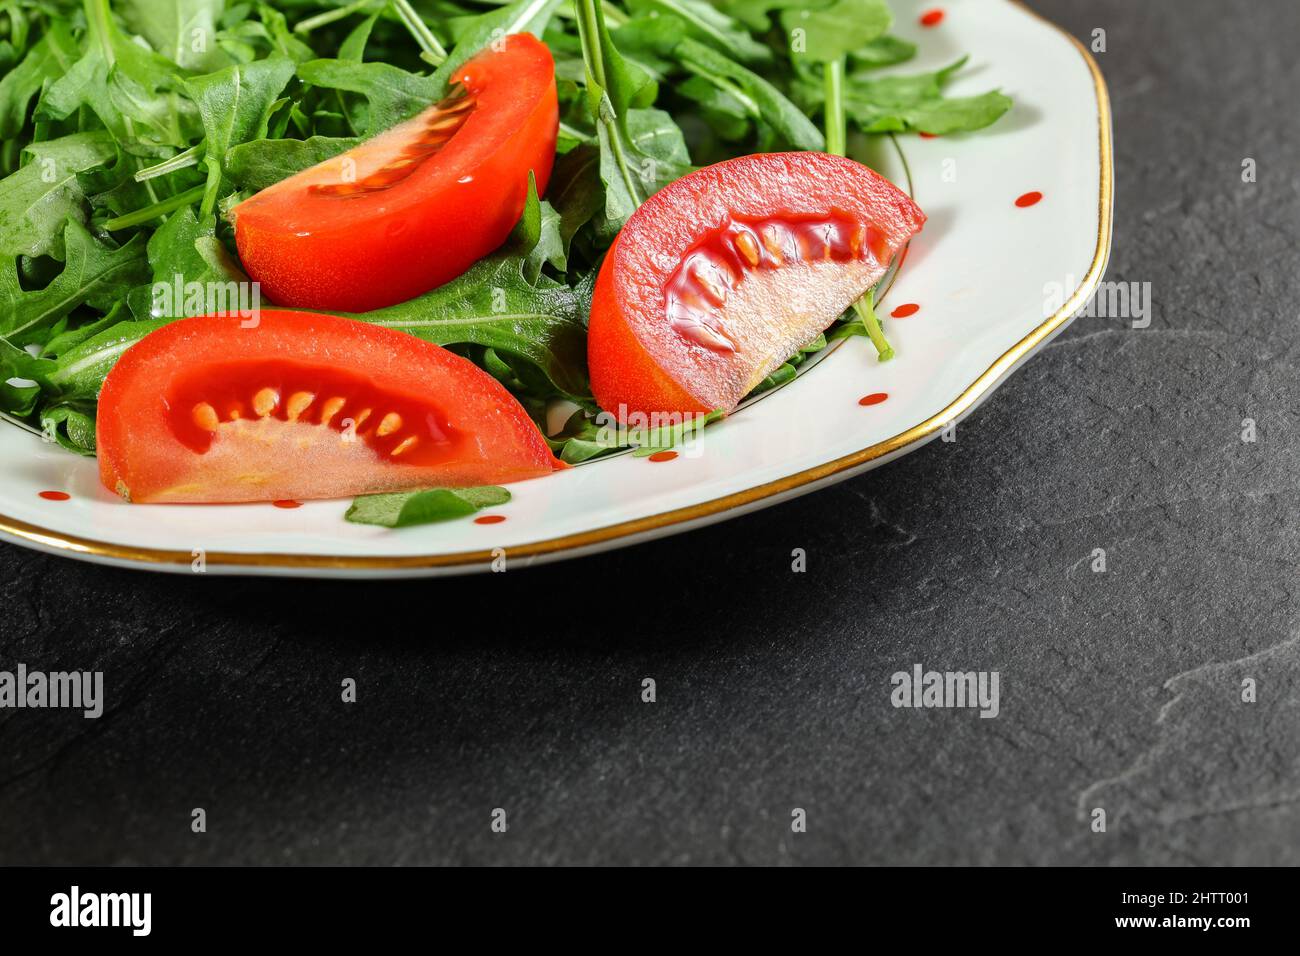 Plate with green leaves salad - arugula rocket - with fresh red tomatos on black stone desk, closeup detail Stock Photo